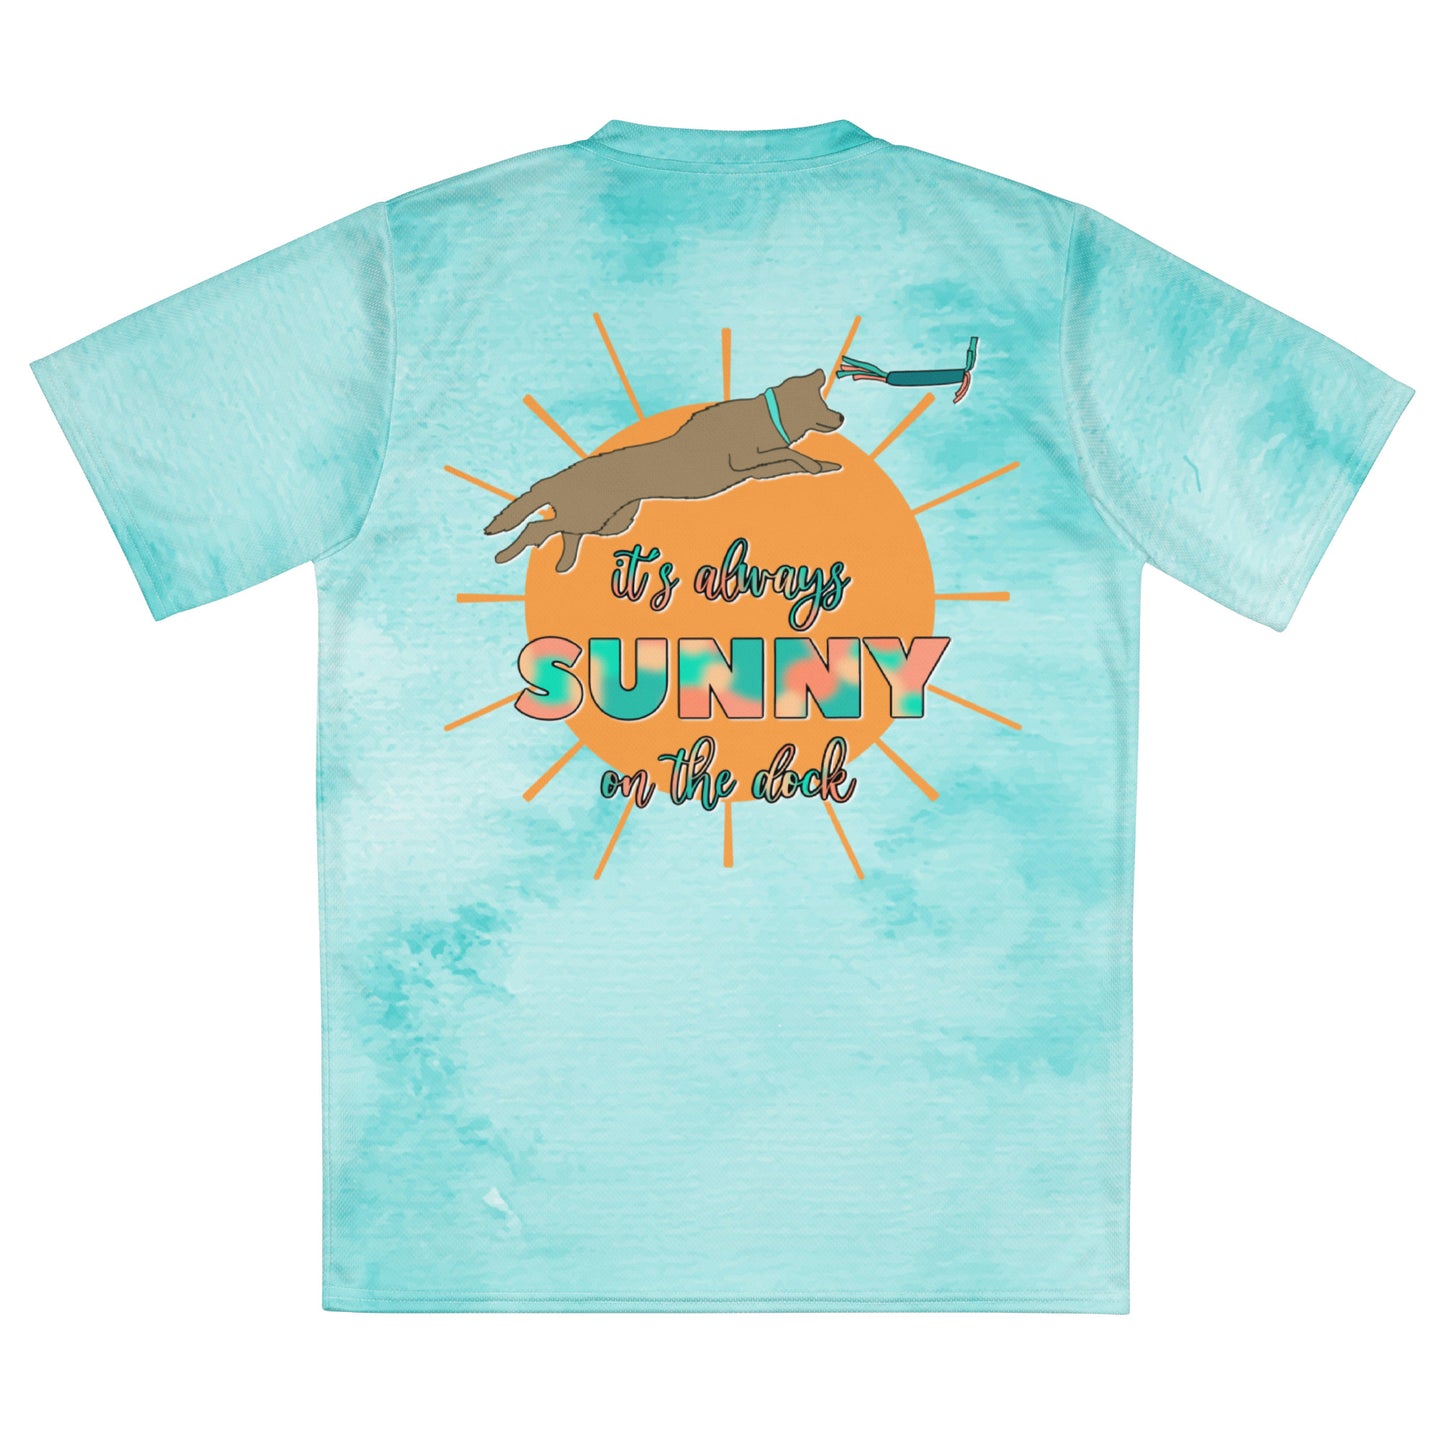 SUNNY Recycled unisex sports jersey